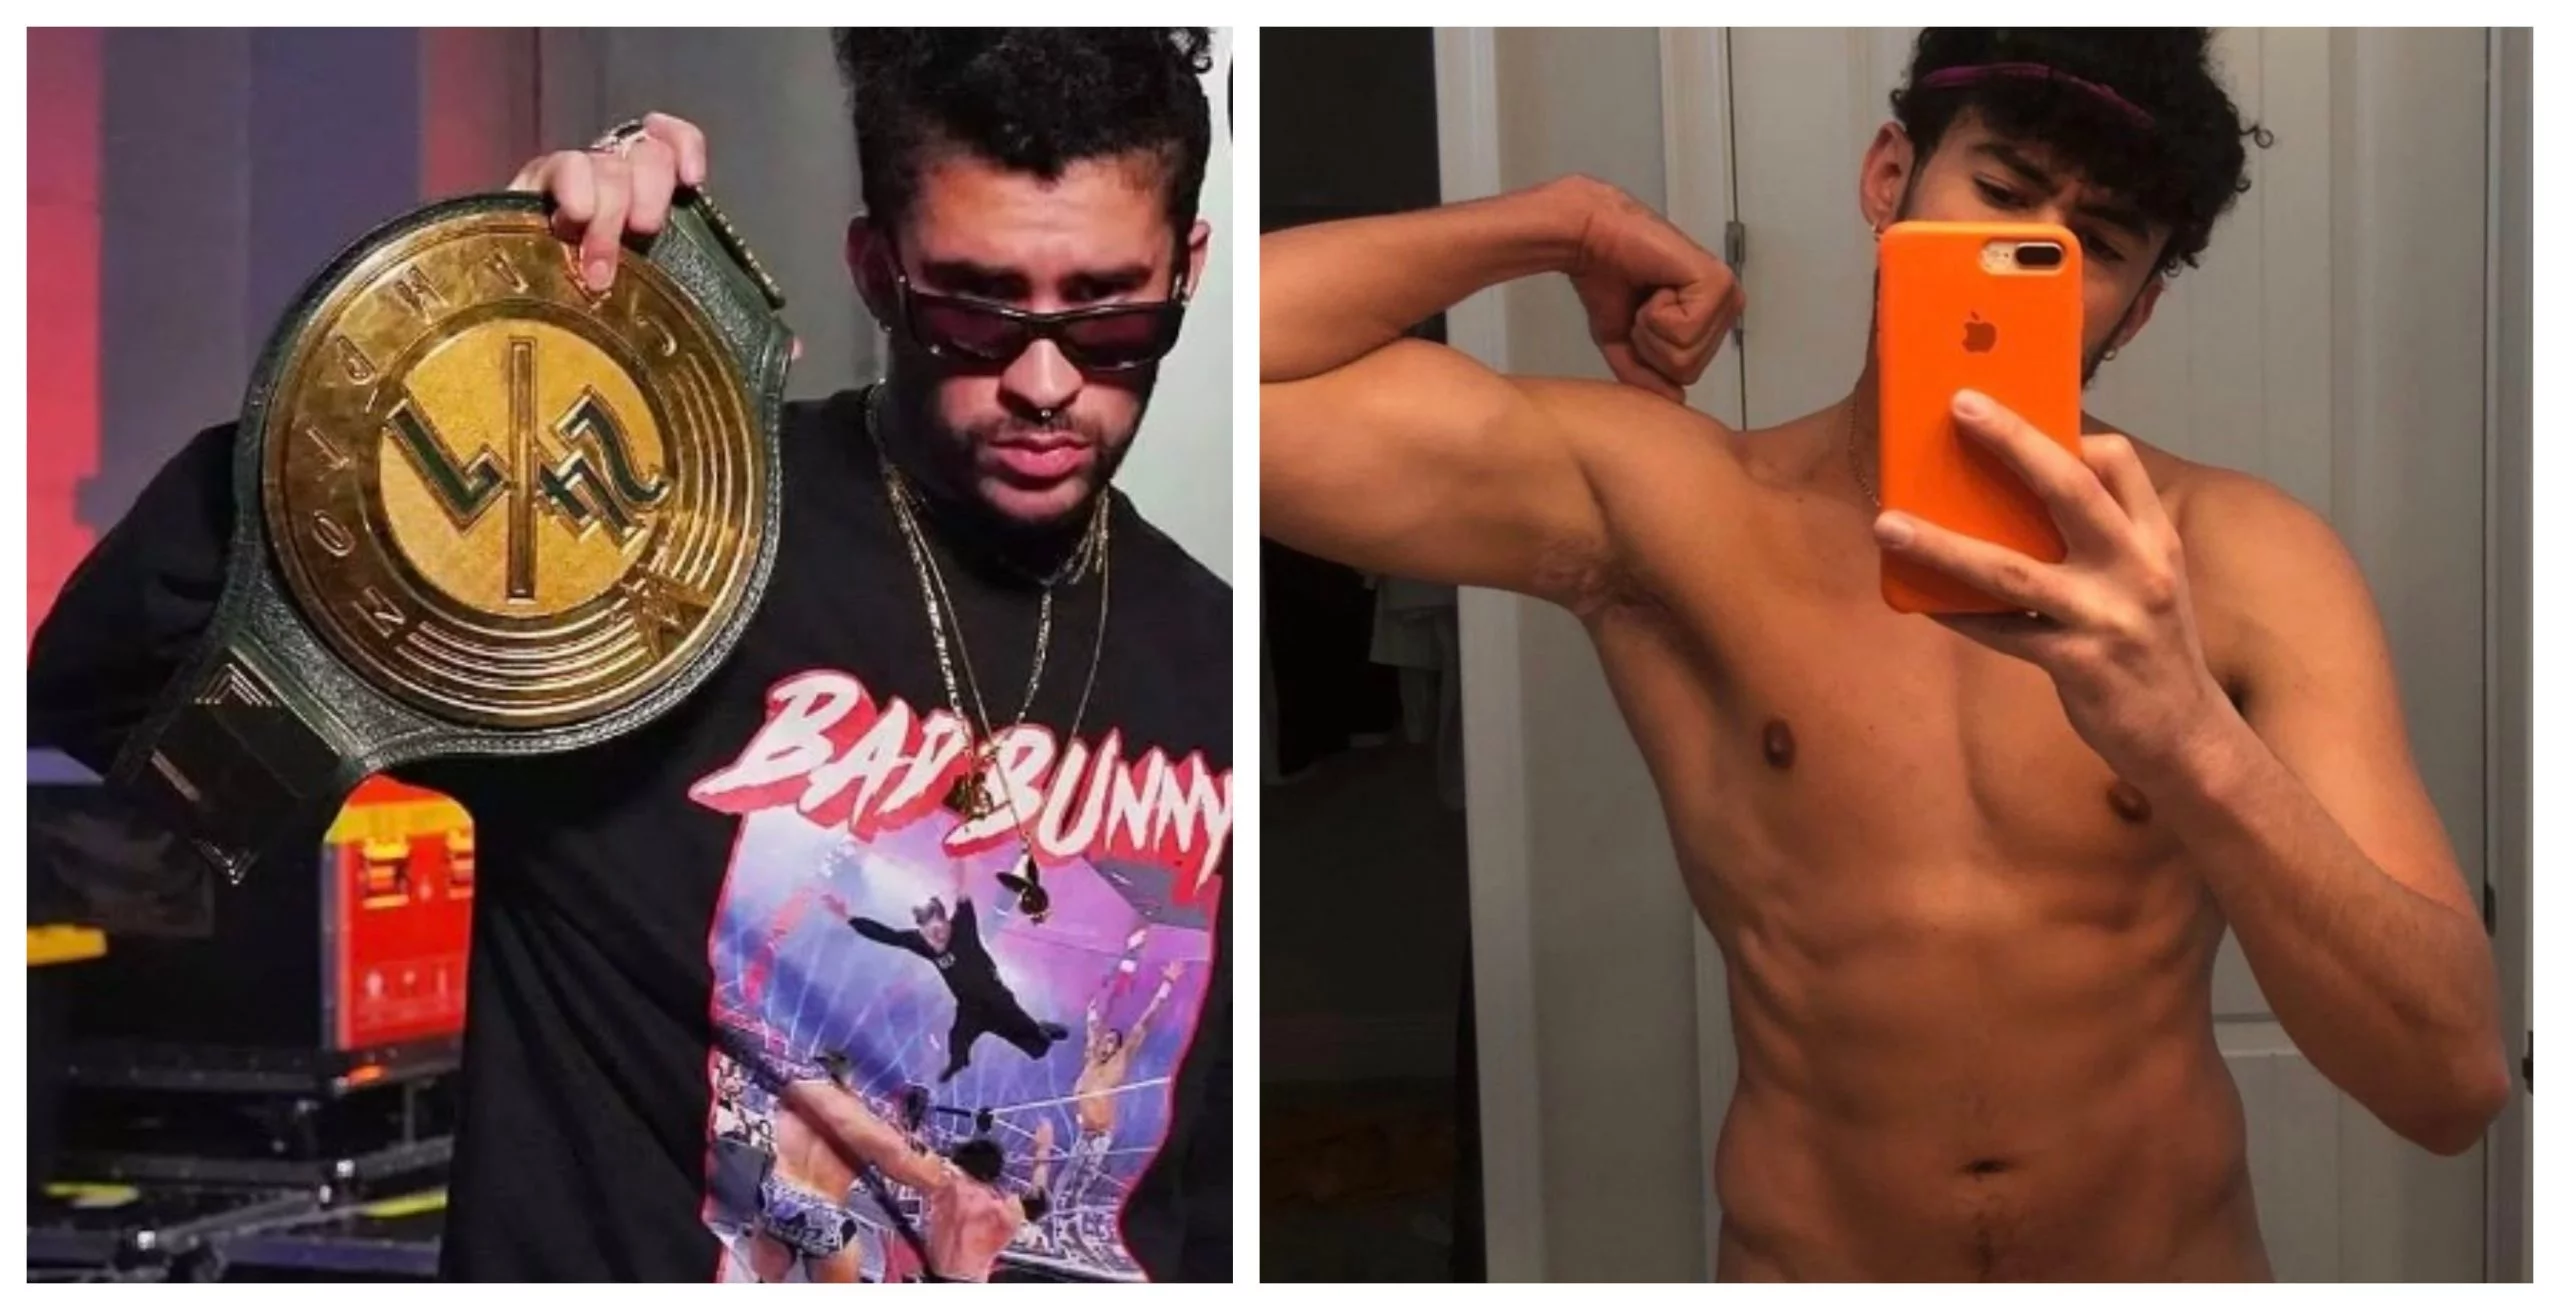 Bad Bunny Unveils Fit Physique Ahead Of WWE Wrestlemania 37 Match